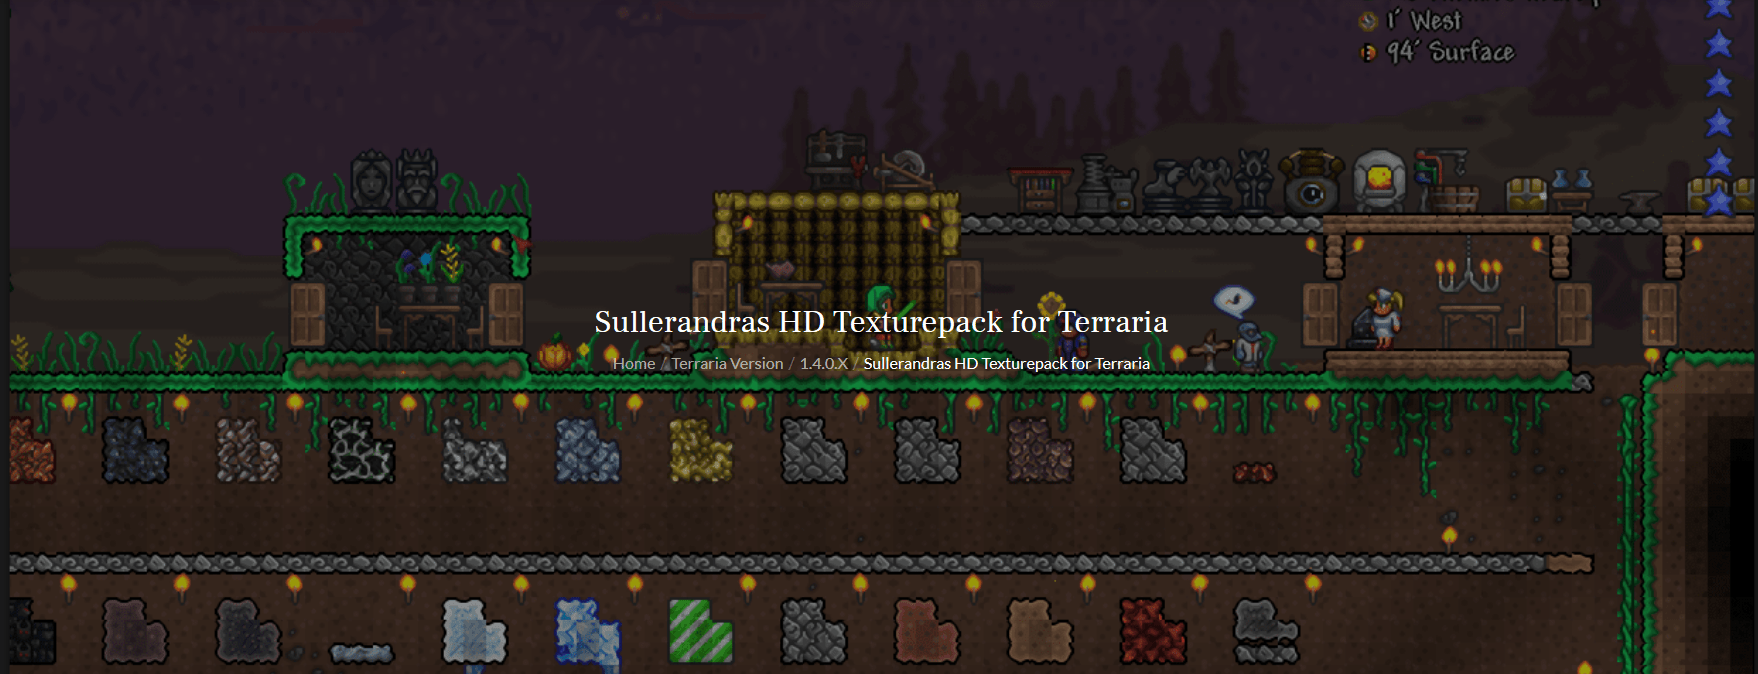 Nsfw textures for terraria фото 59